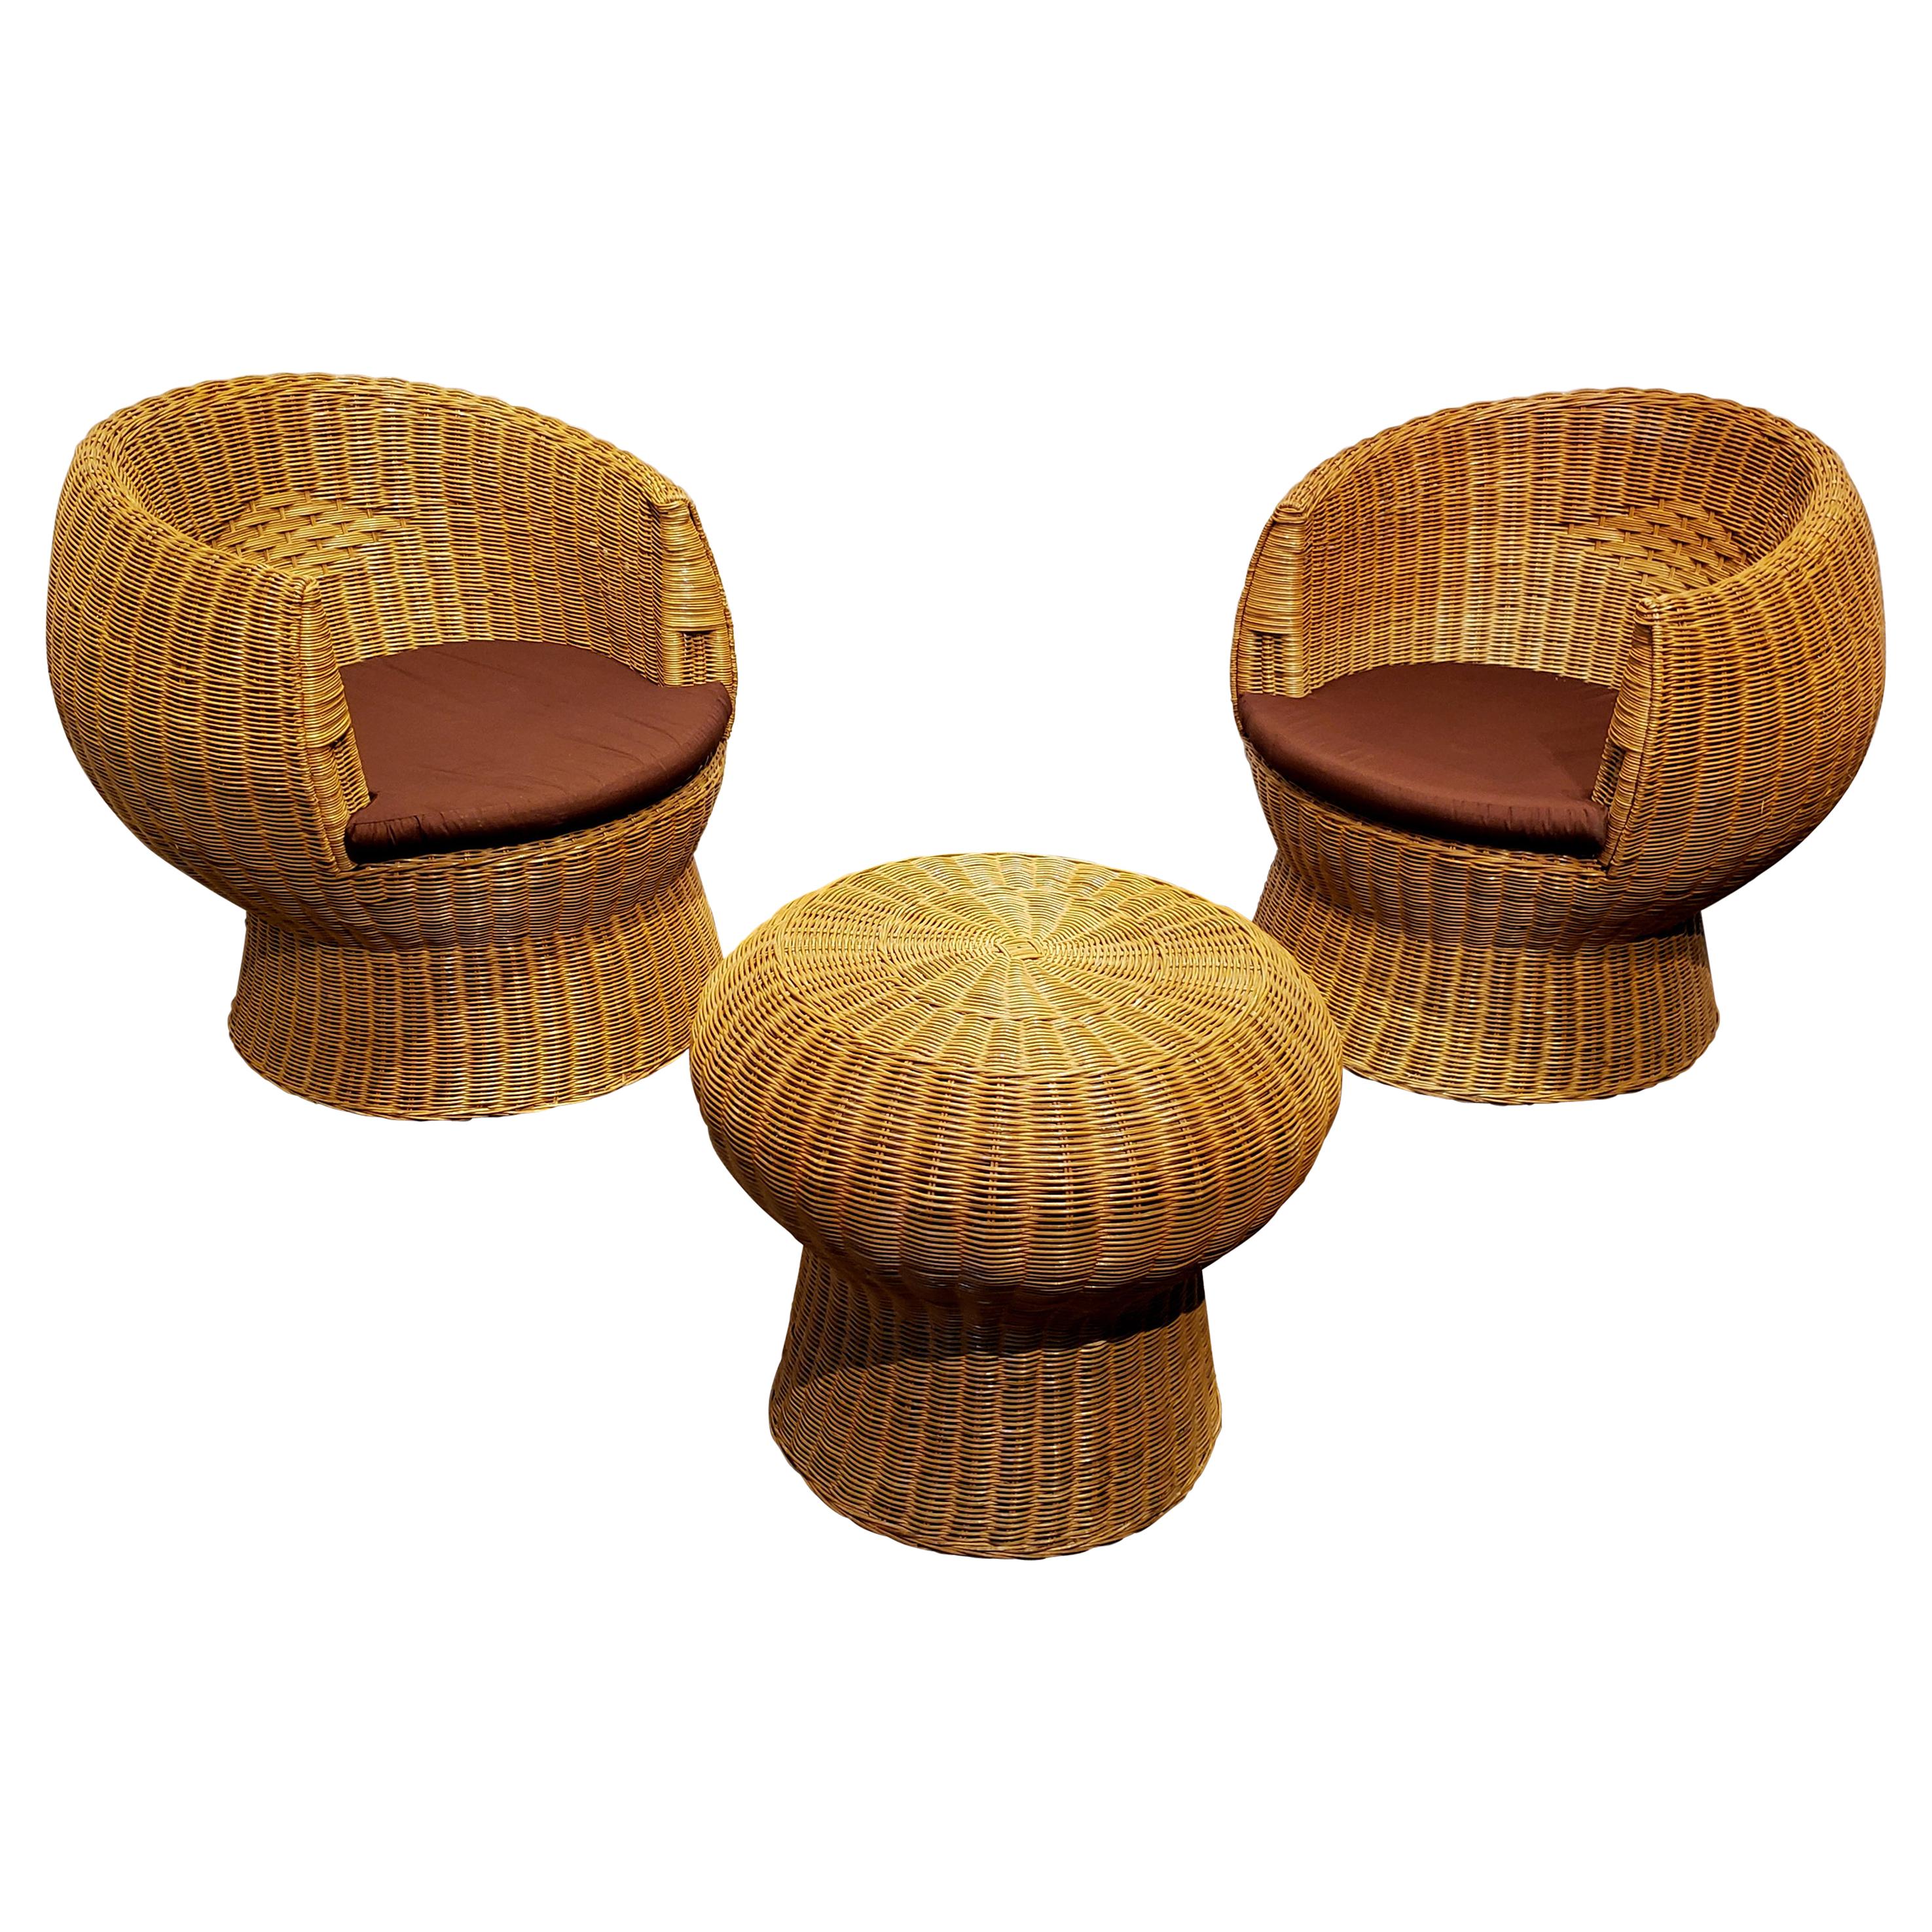 1970s Modernist Wicker Patio Set with Two Lounge Chairs and One Side Table